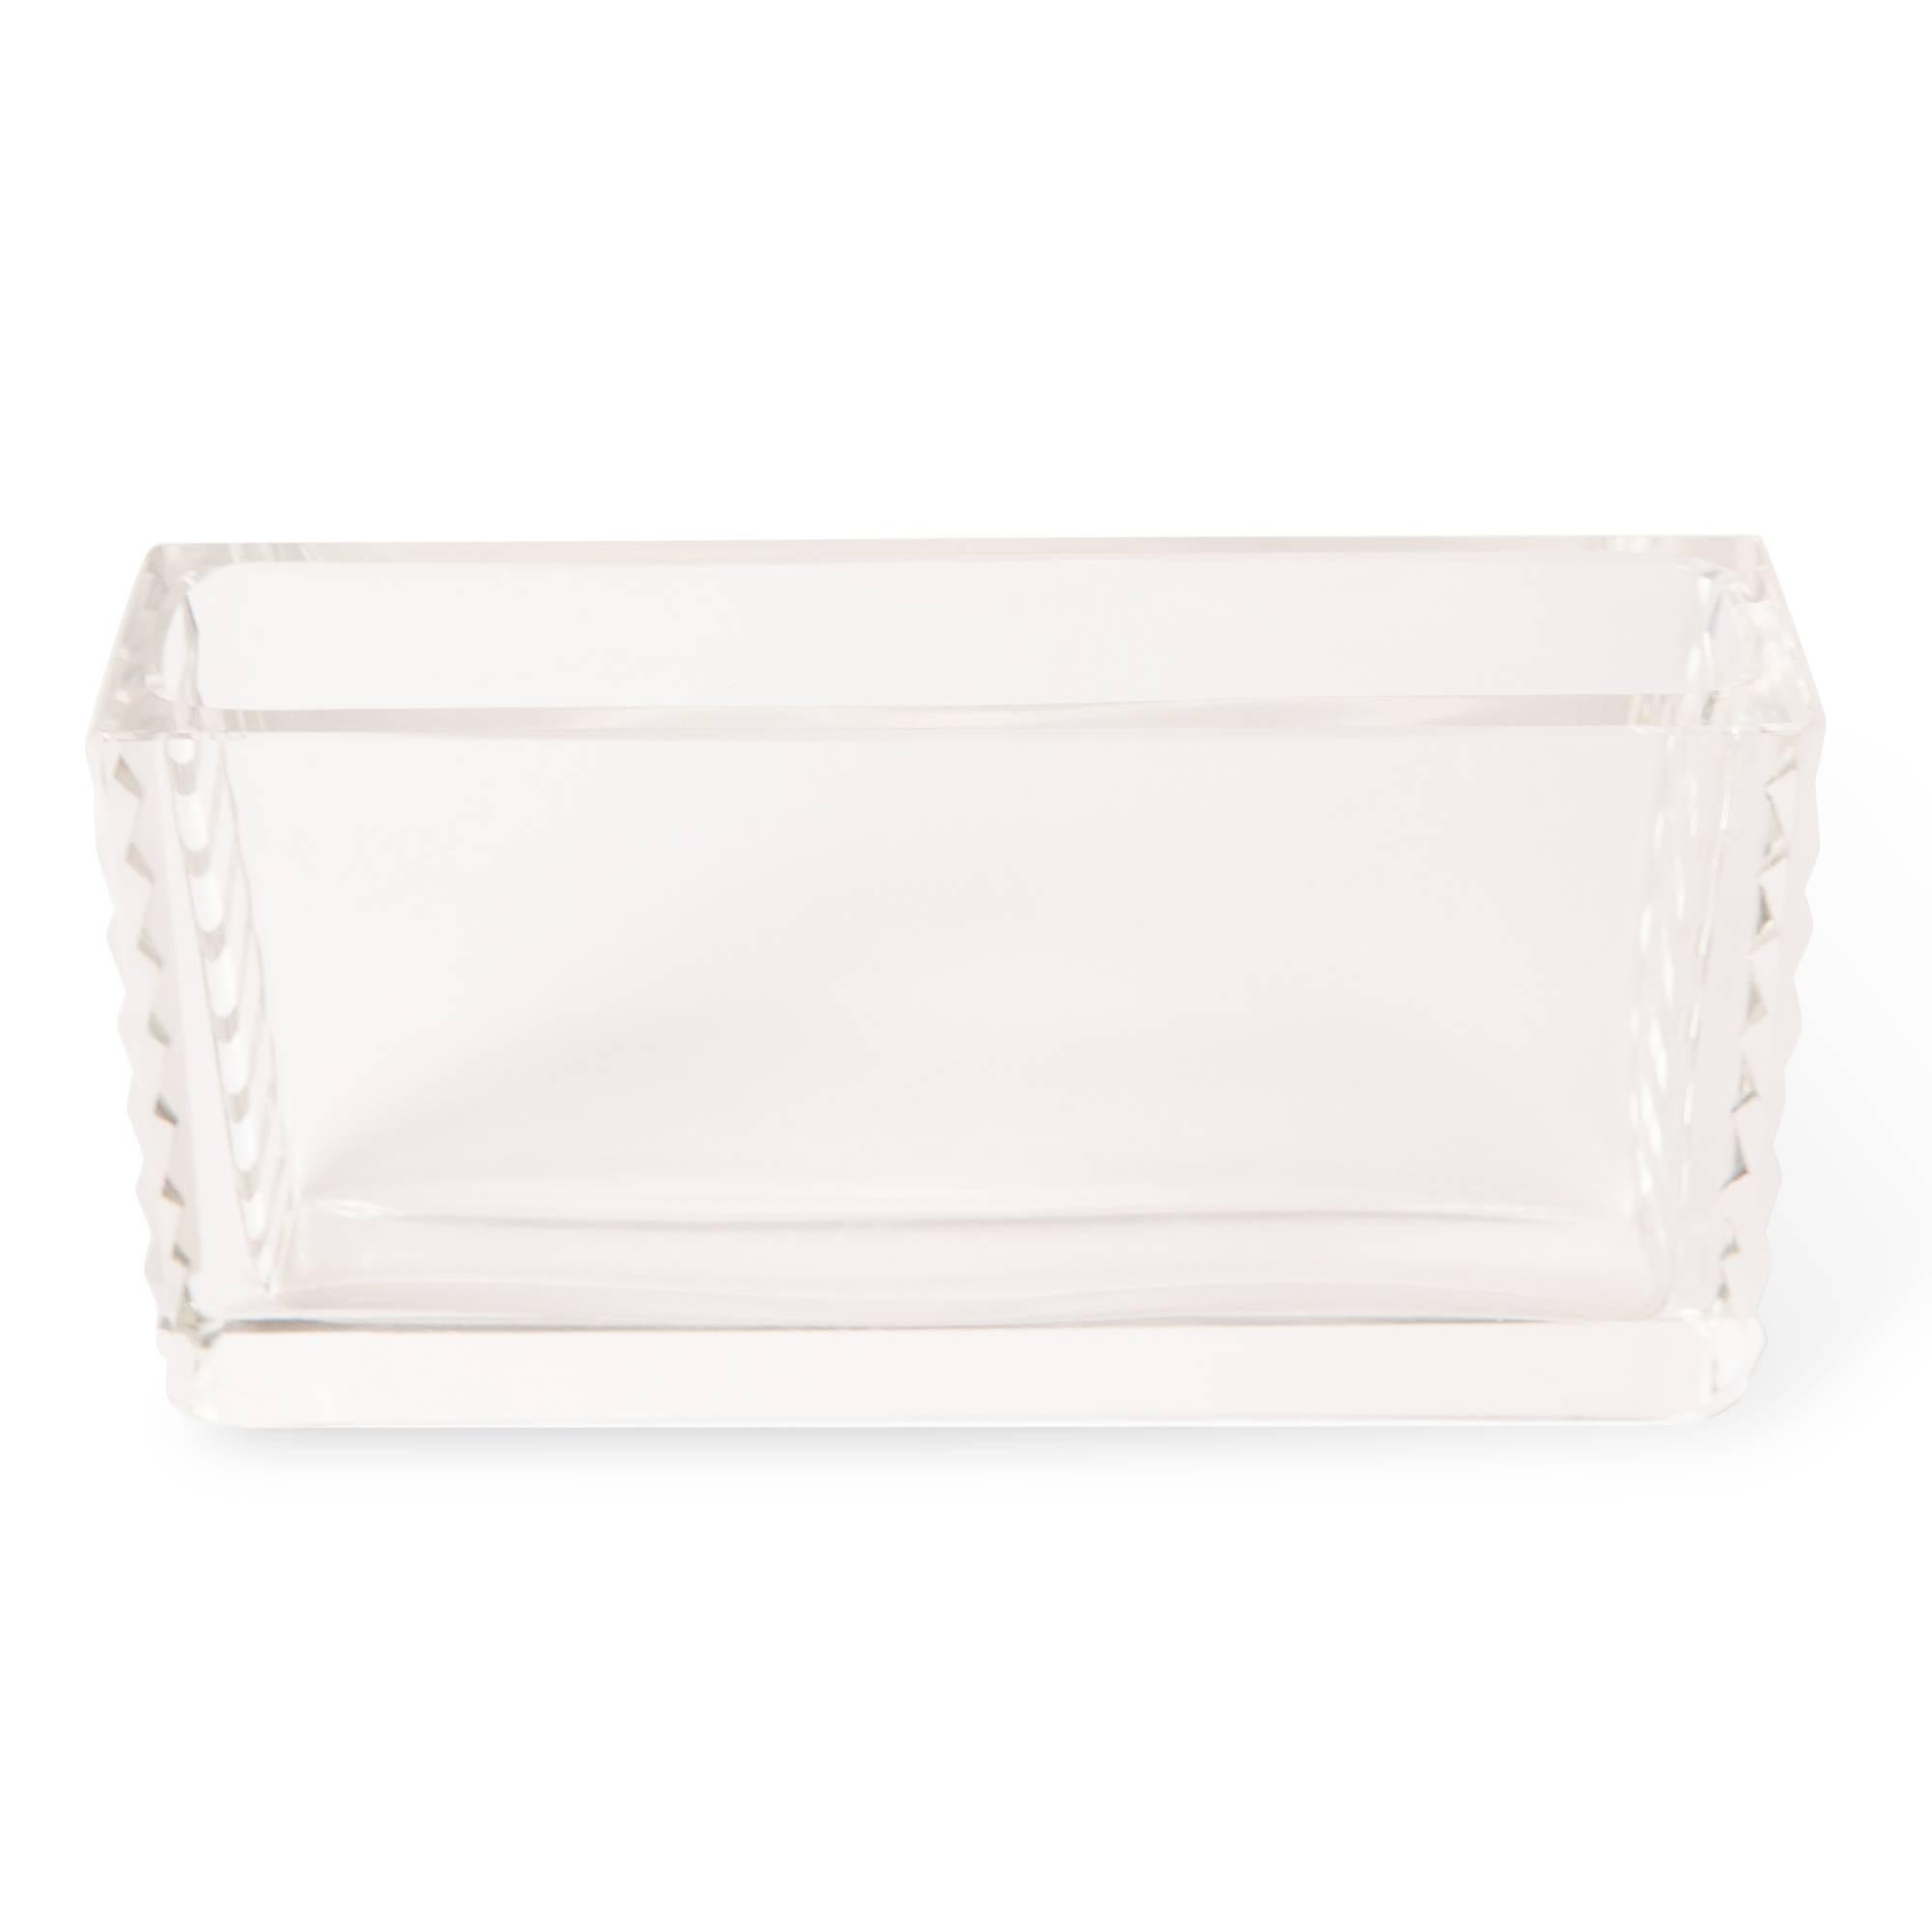 Narrow clear glass rectangular vase, with deeply incised and polished sides by Jean Luce, France, circa 1930. Signed. Measures: 8 1/4 in x 2 in, height 4 1/4 in.